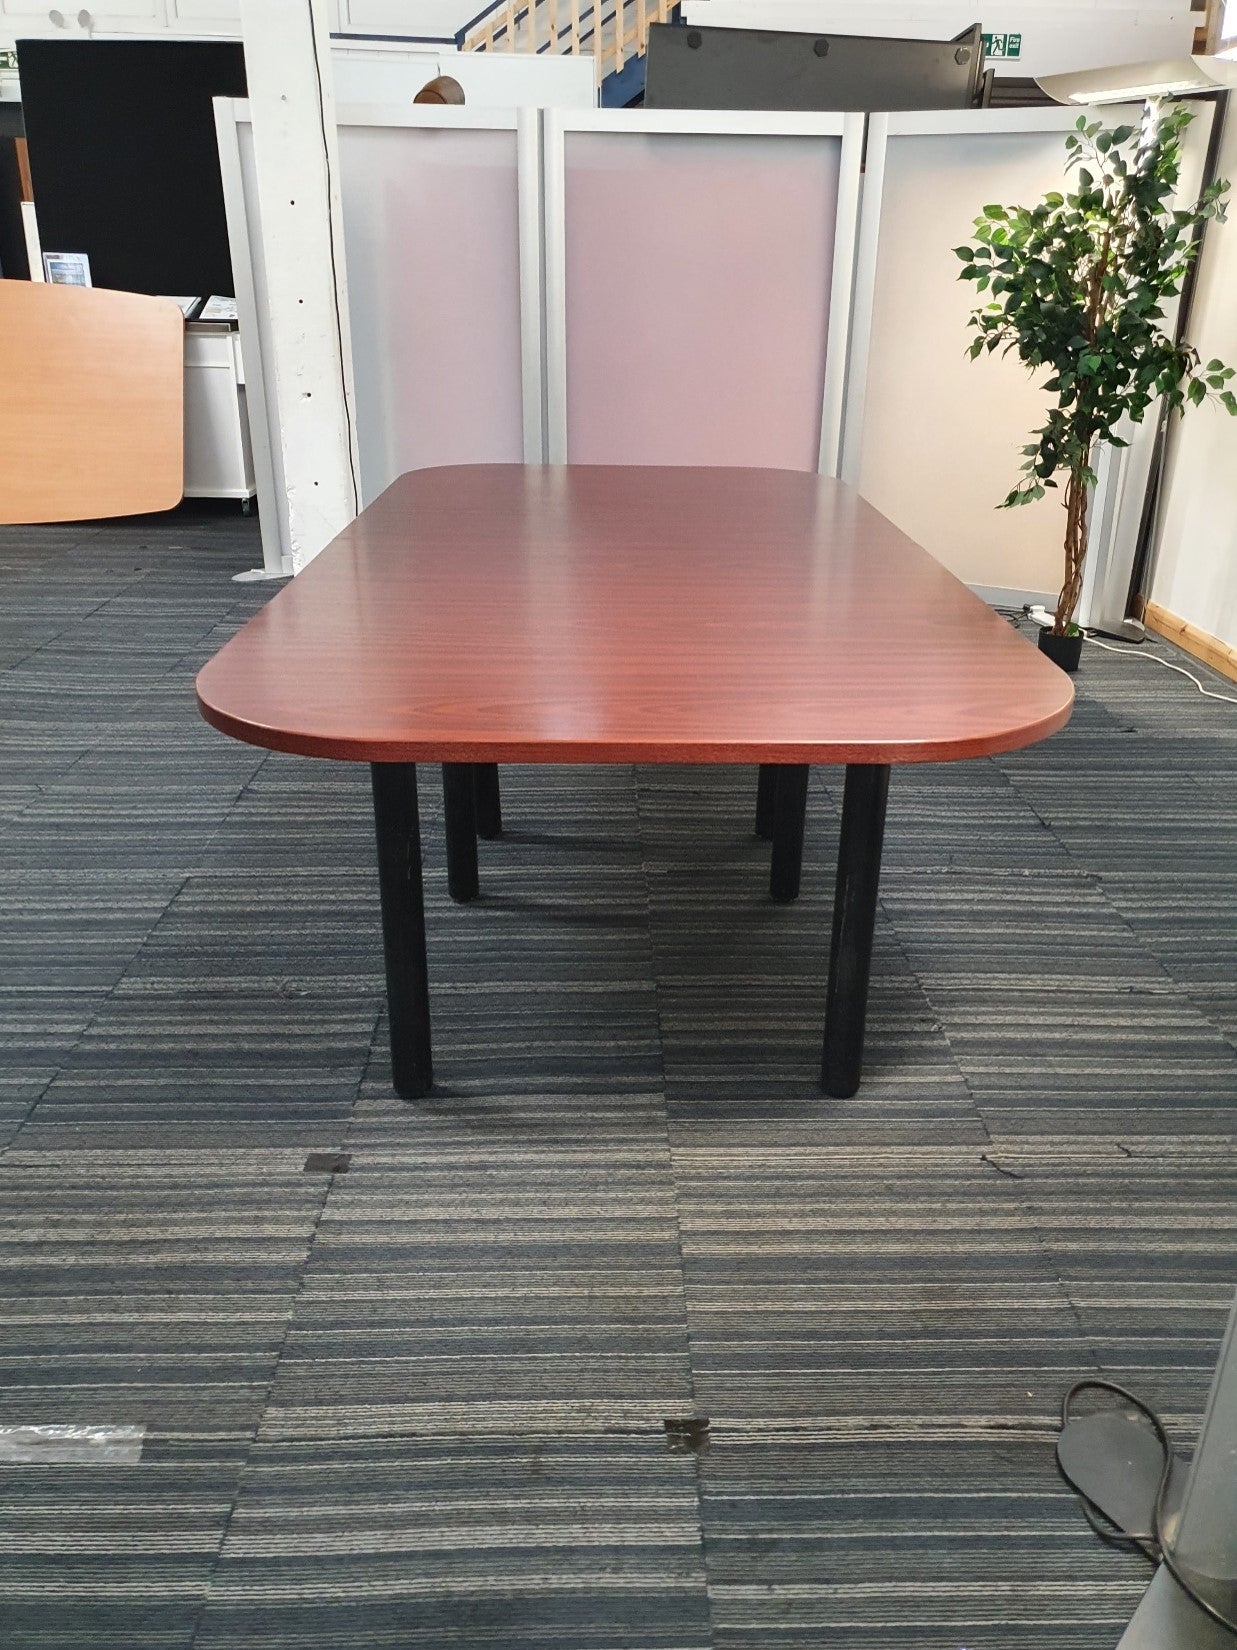 Clear meeting table in front of a divider